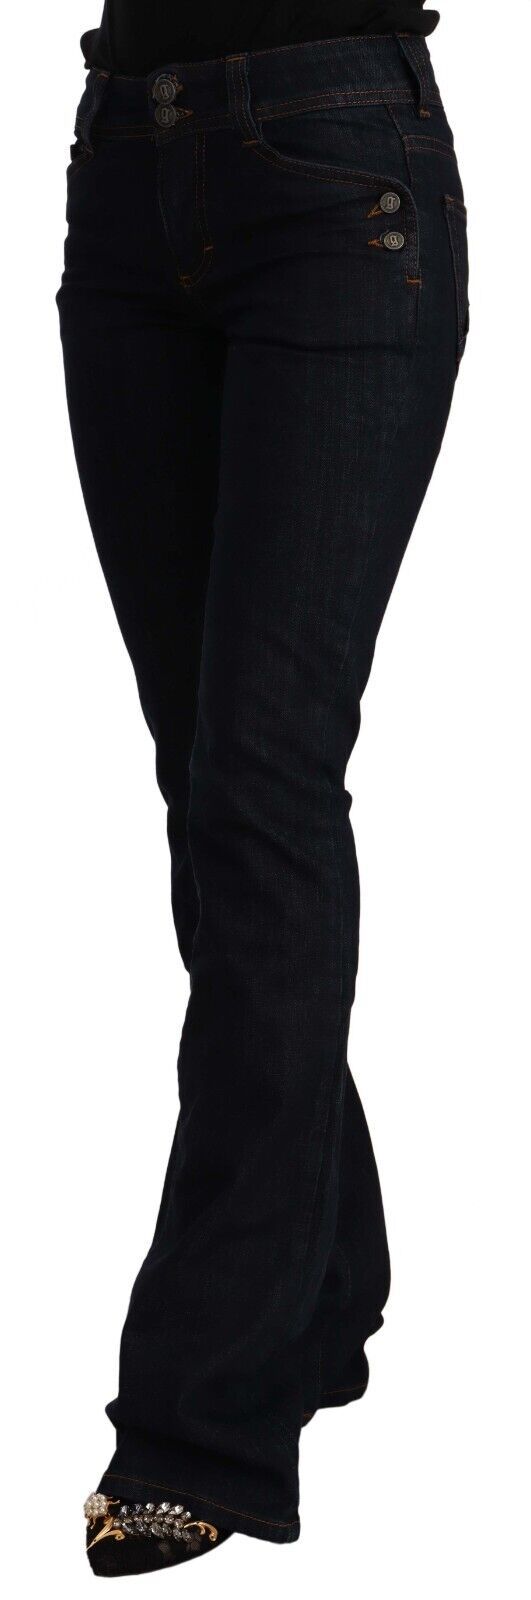 Chic Flared Mid-Waist Black Jeans